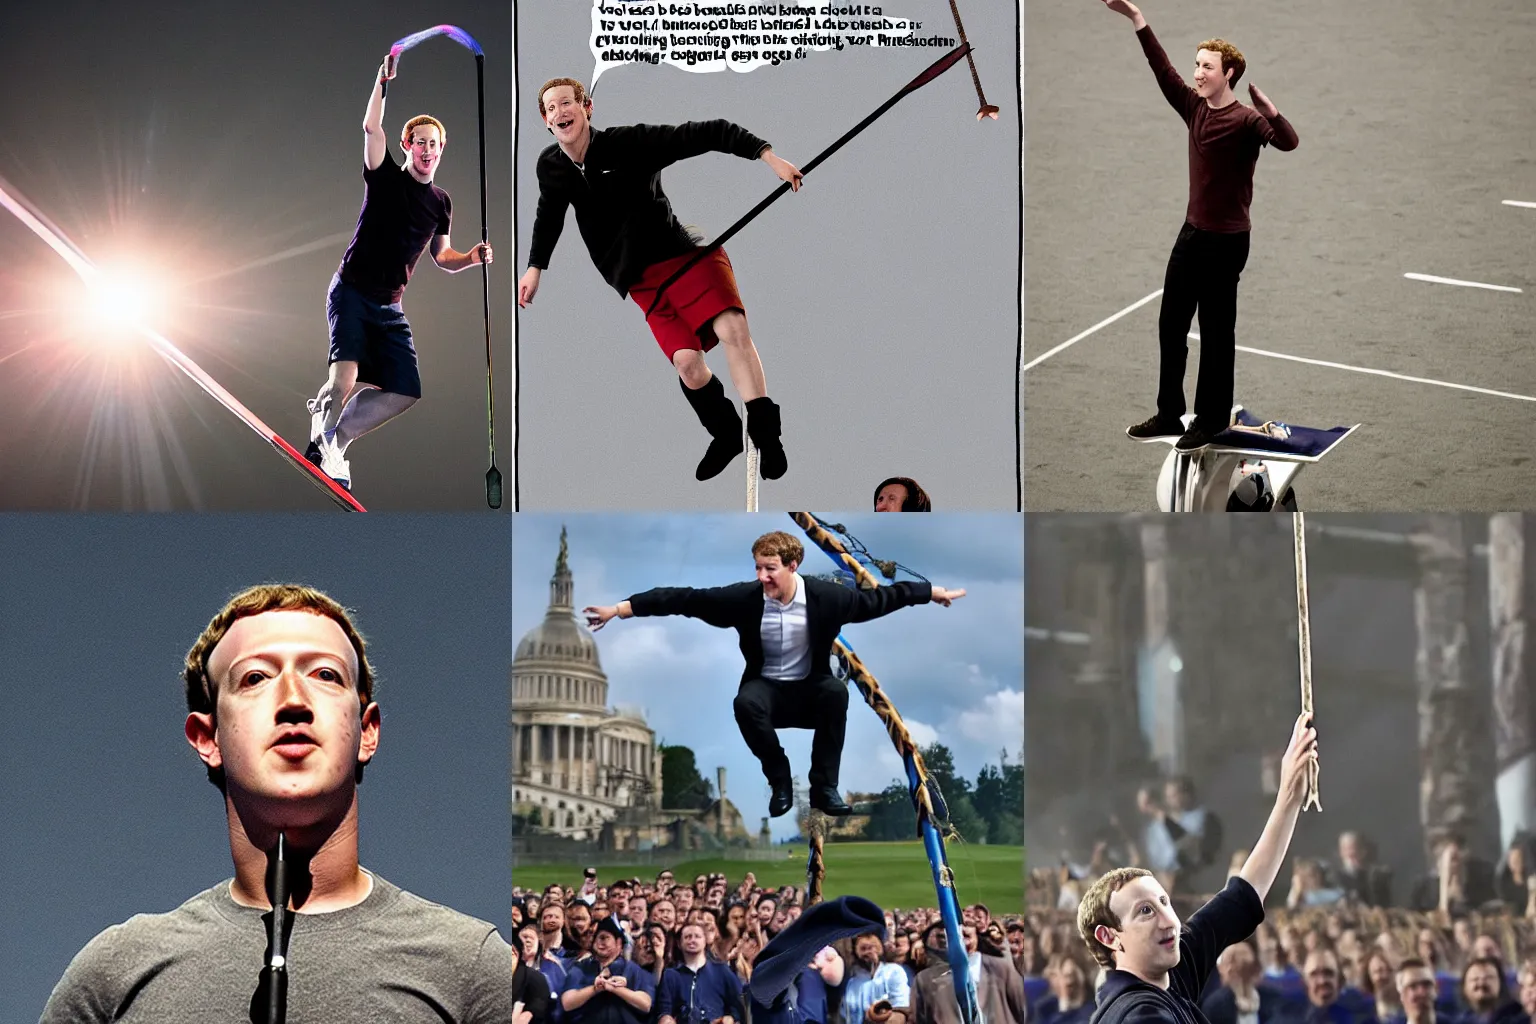 Prompt: Mark Zuckerberg sitting on a flying broomstick several feet in the air, playing Quidditch